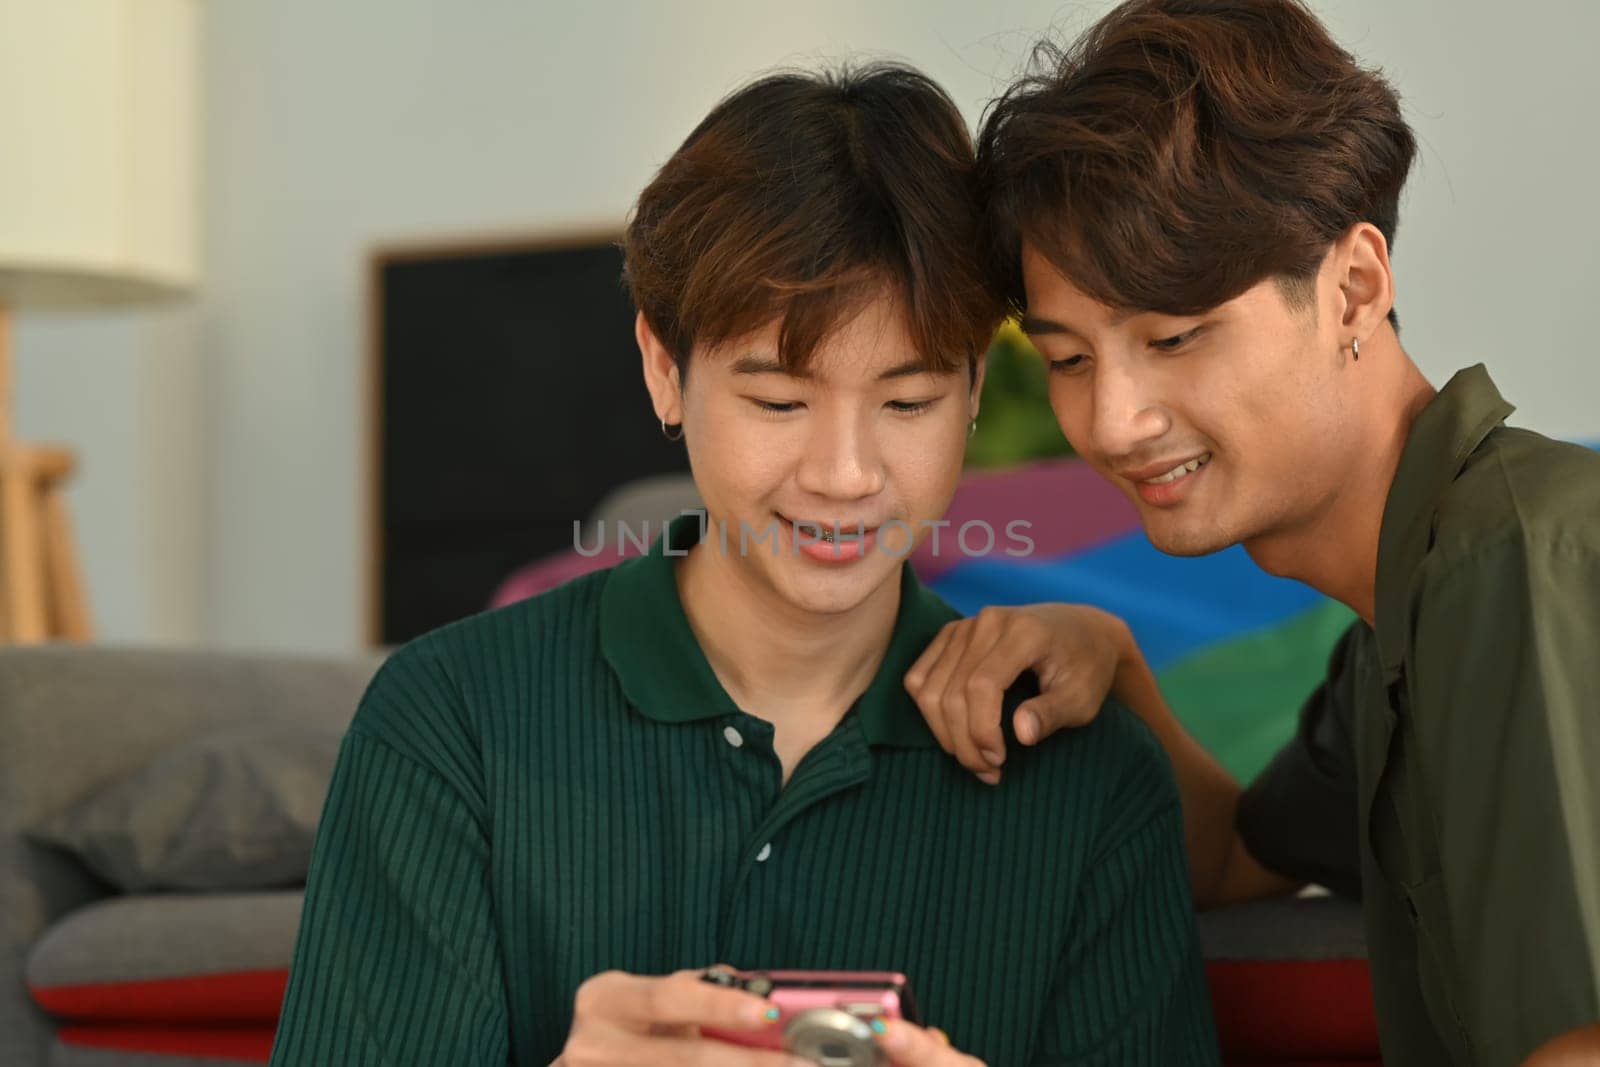 Joyful gay couple taking a selfie with compact camera in living room rainbow flag in background. LGBT, love and human rights concept.